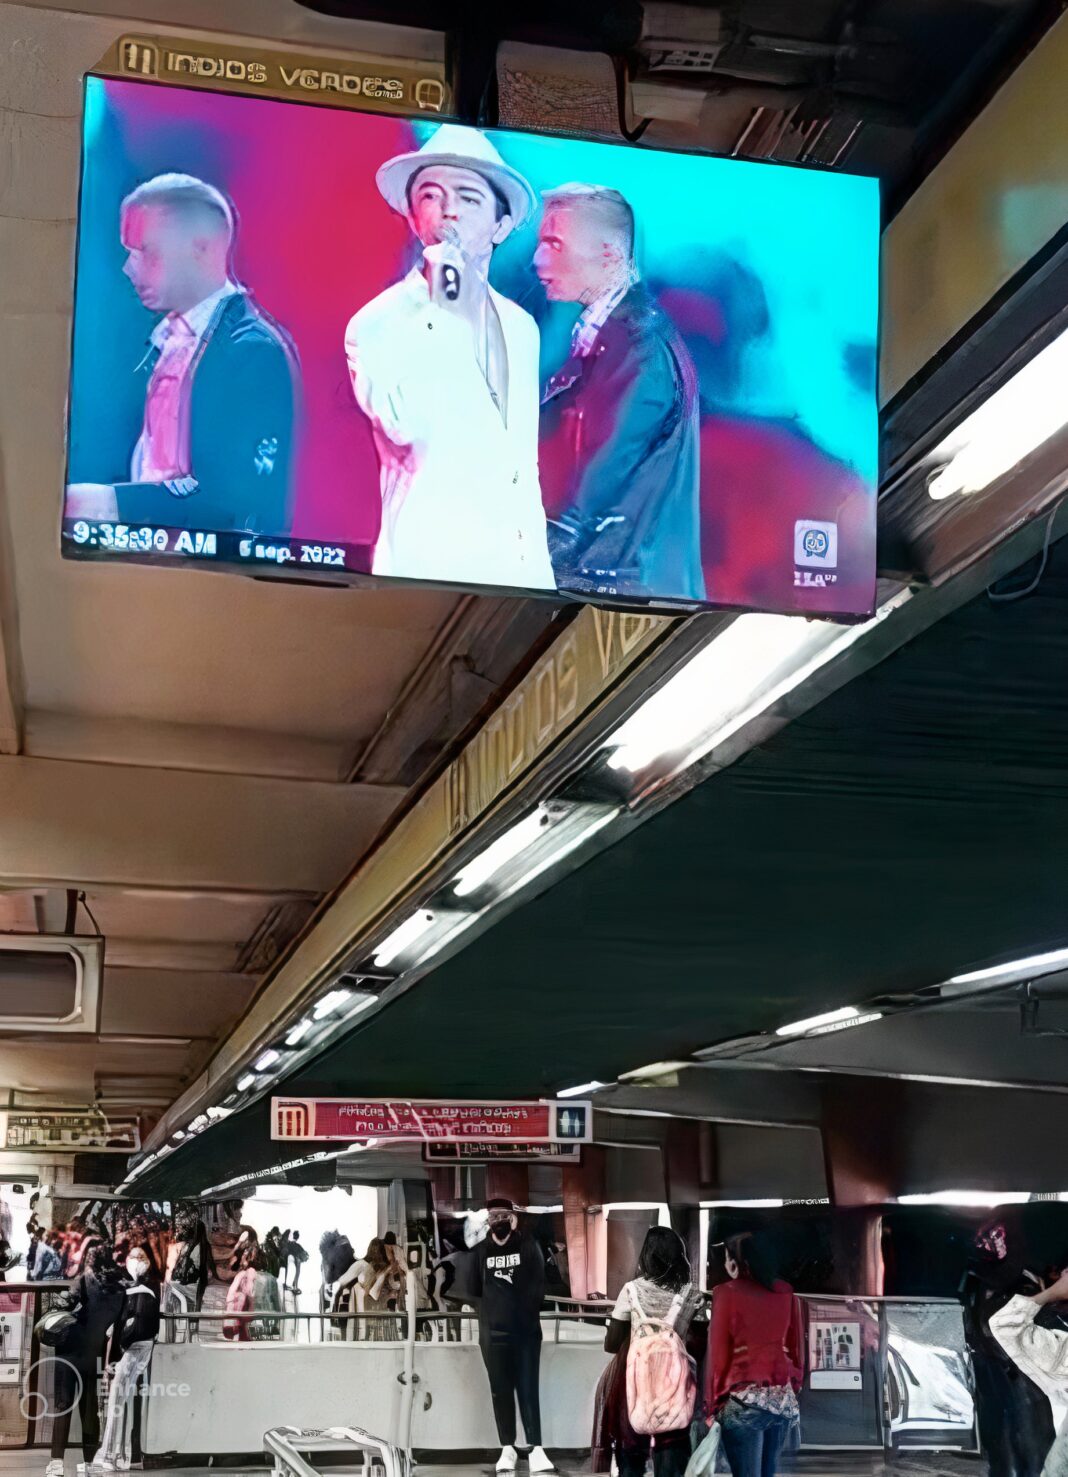 Dimash videos are broadcasted in the Mexican subway 